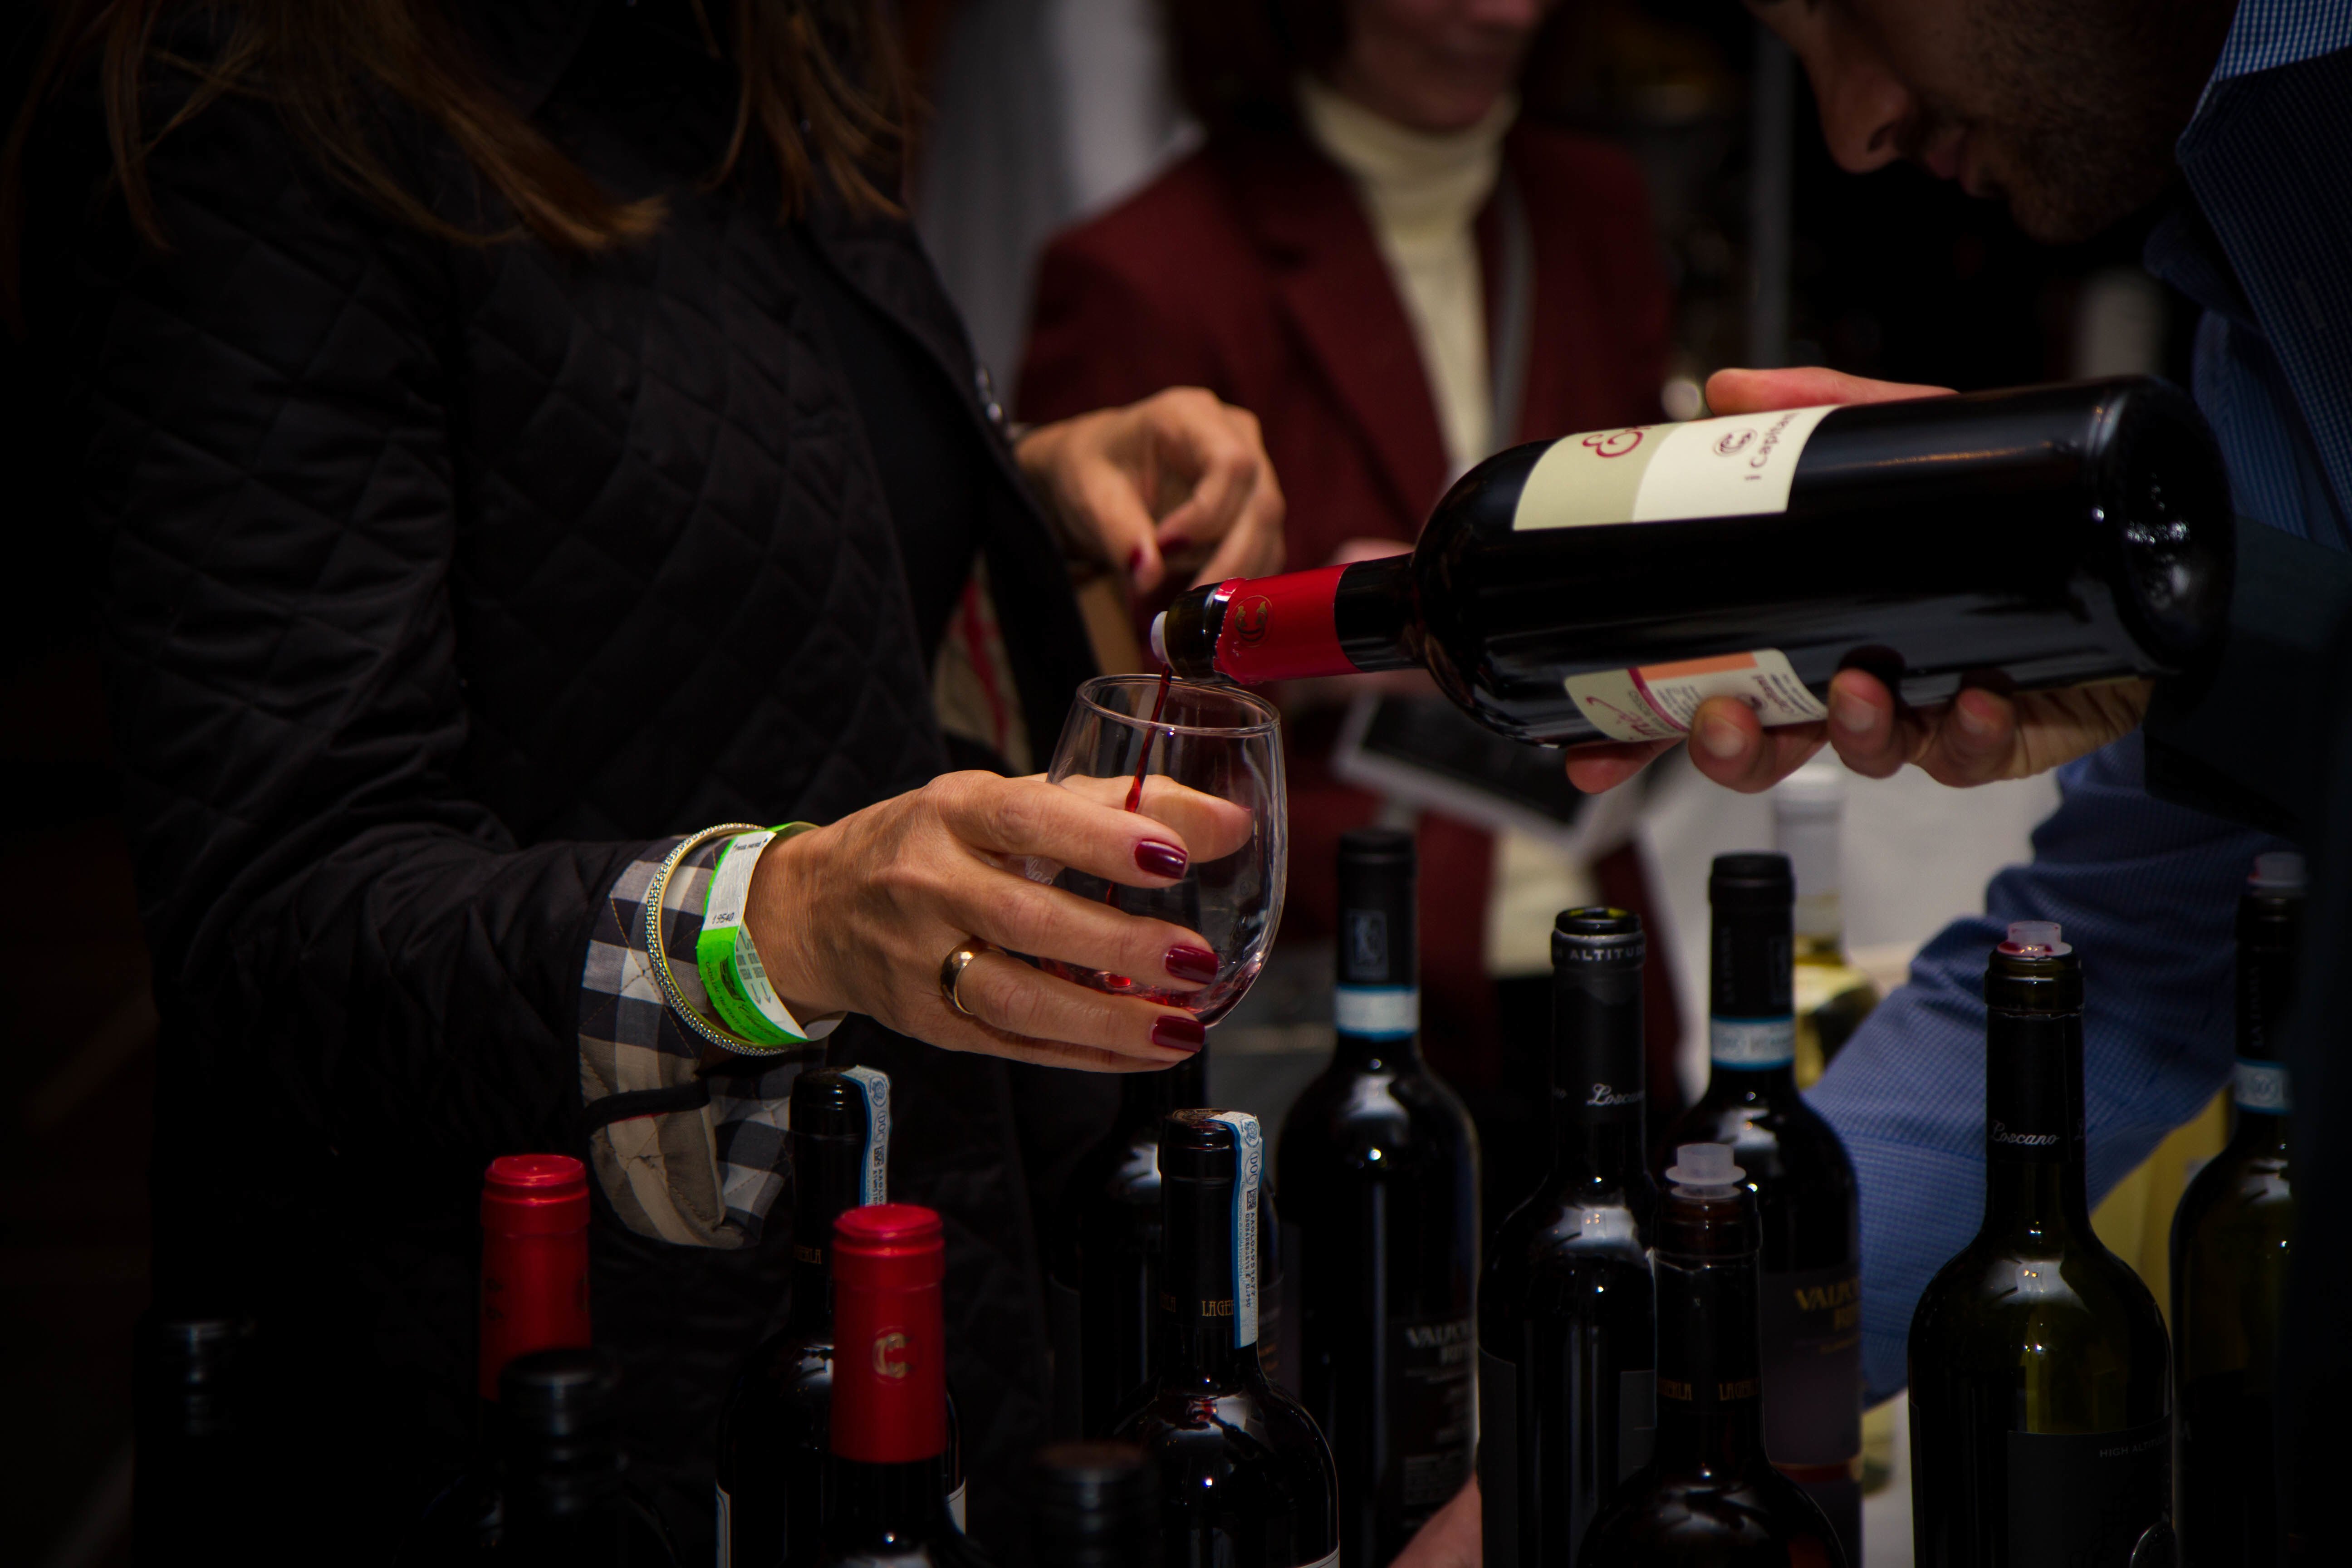 Guests will enjoy over 150 wines, light fare, artisanal food samples, and live jazz at the New Jersey Winter Wine Festival.